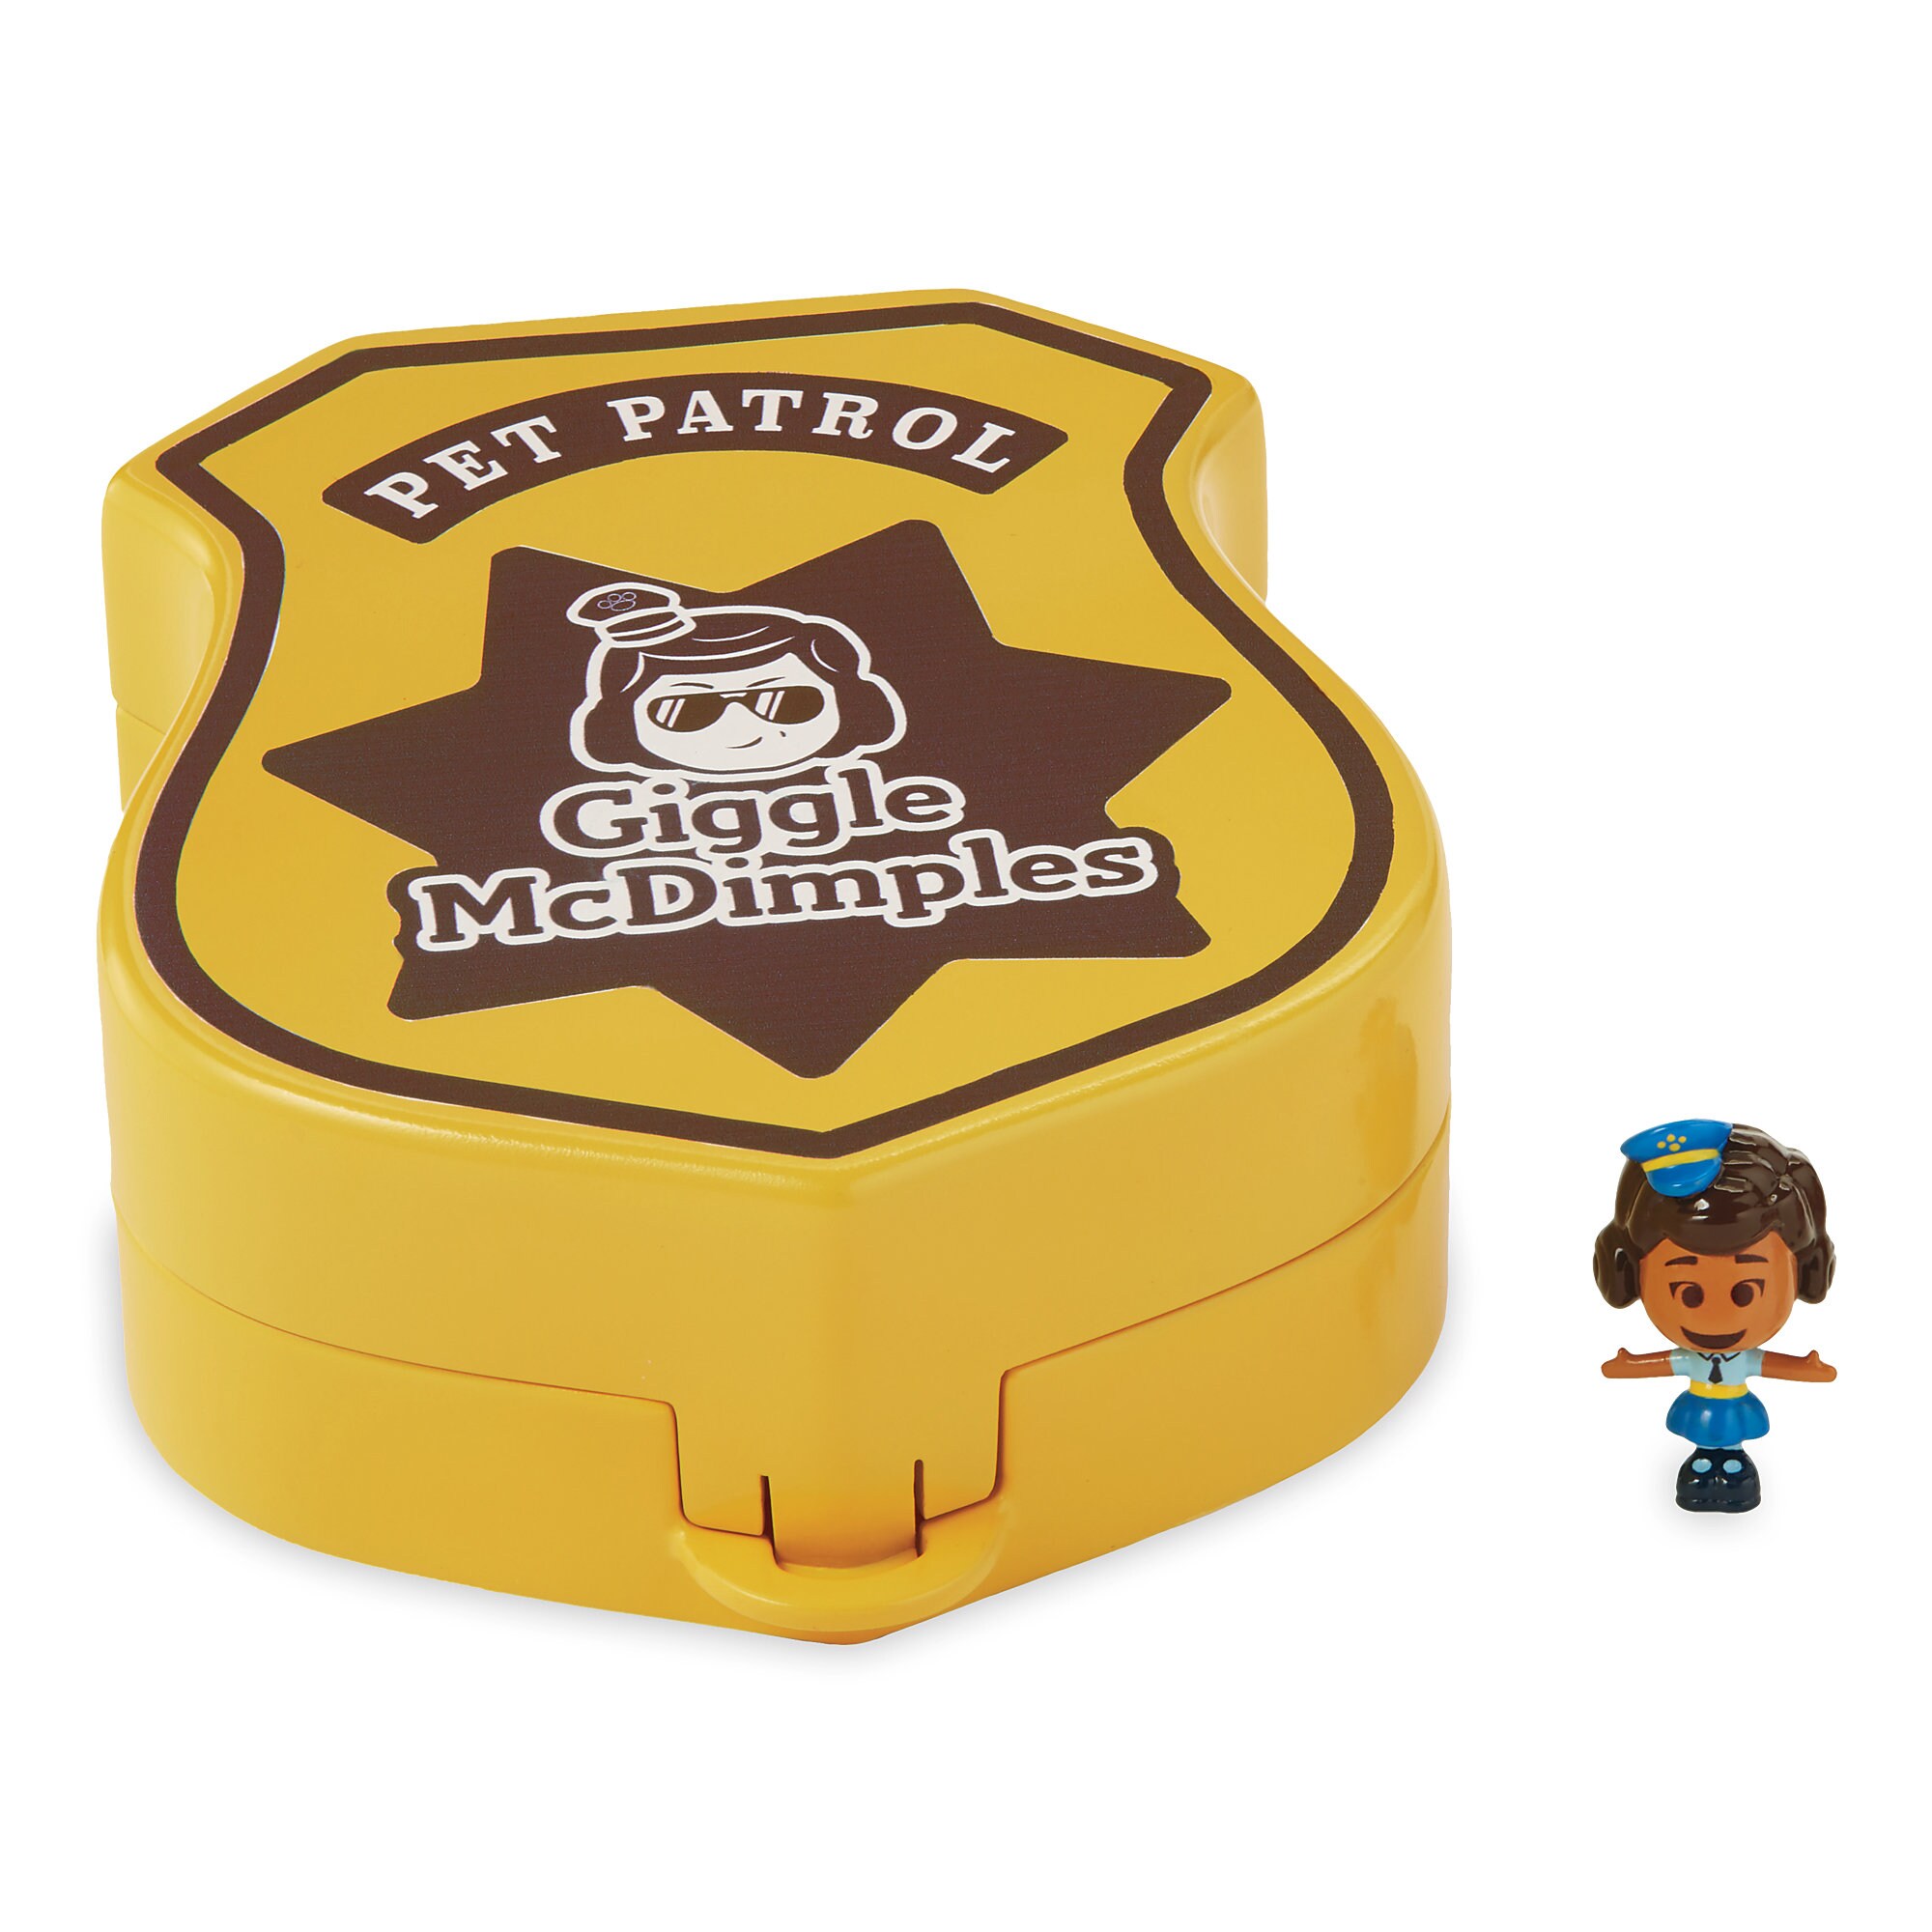 Giggle McDimples Pet Patrol Play Set - Toy Story 4